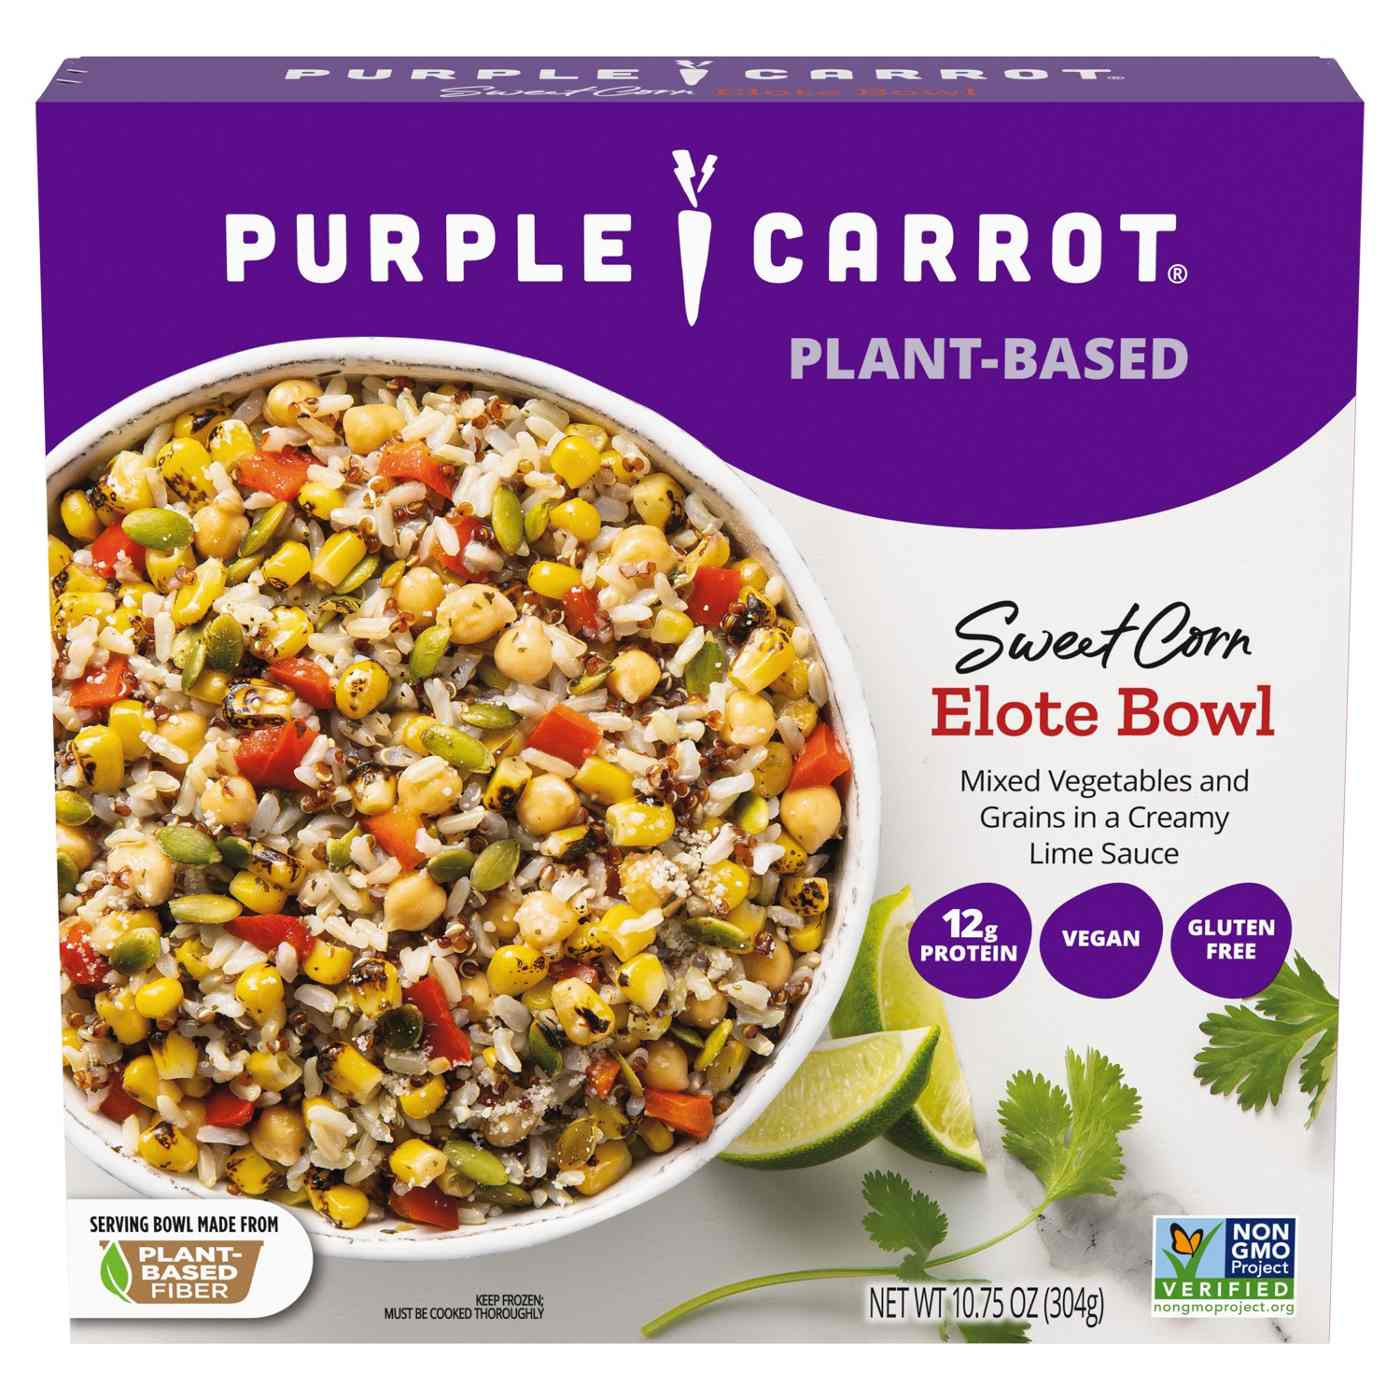 Purple Carrot Plant-Based 12g Protein Sweet Corn Elote Bowl Frozen Meal; image 1 of 7